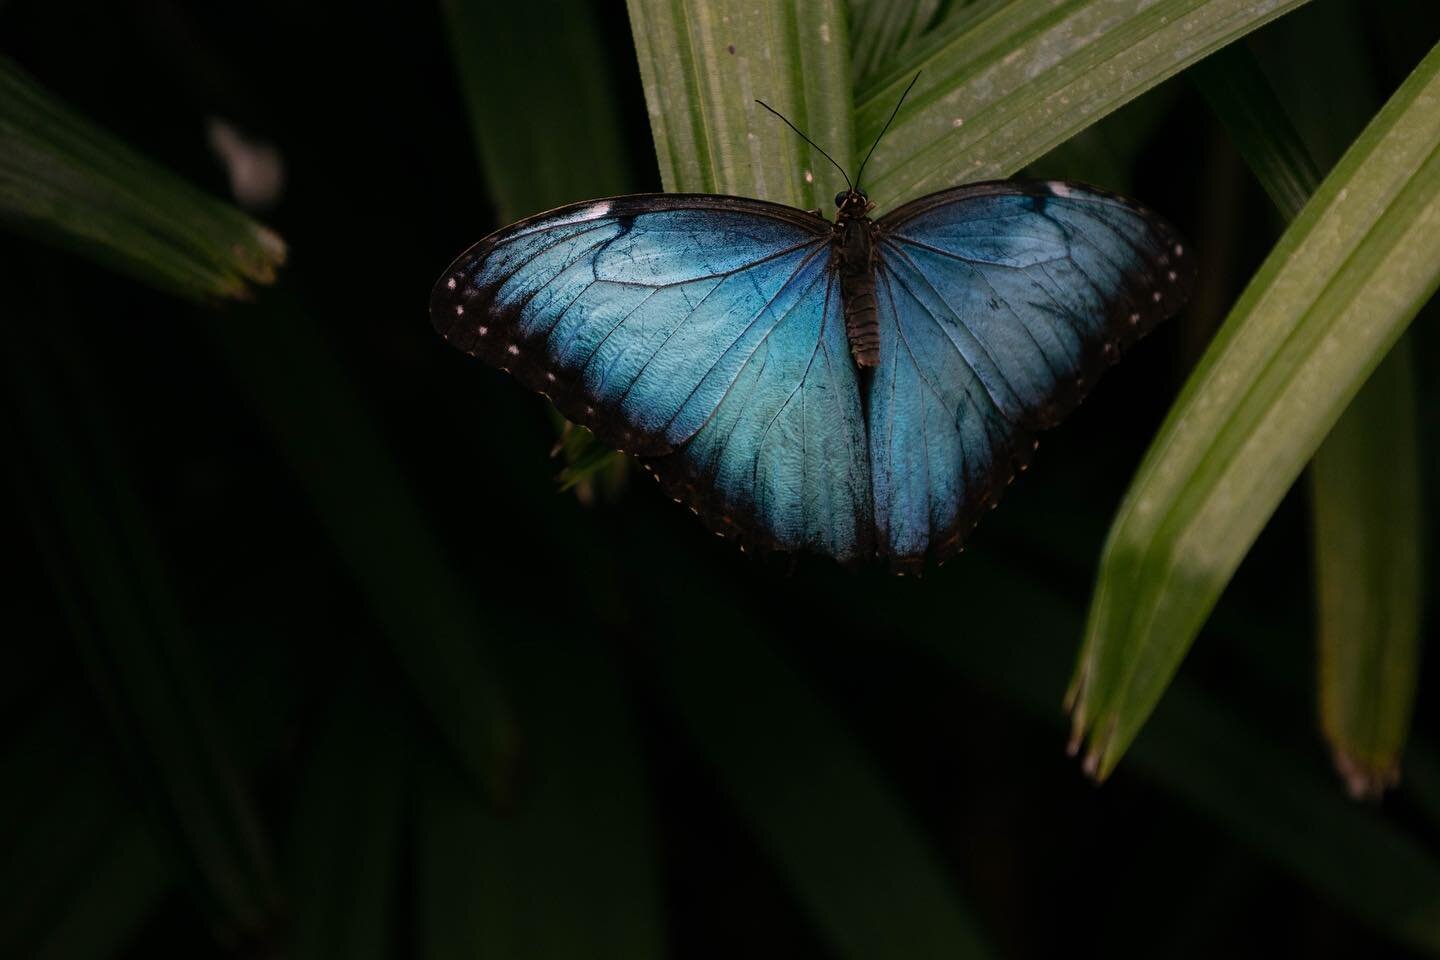 New photos are available for purchase on my print shop! The album is titled 2022 ✨🦋

Link in bio 🖤 

#butterlies #bluebutterfly #spiritual #naturephotography #outdoorphotography